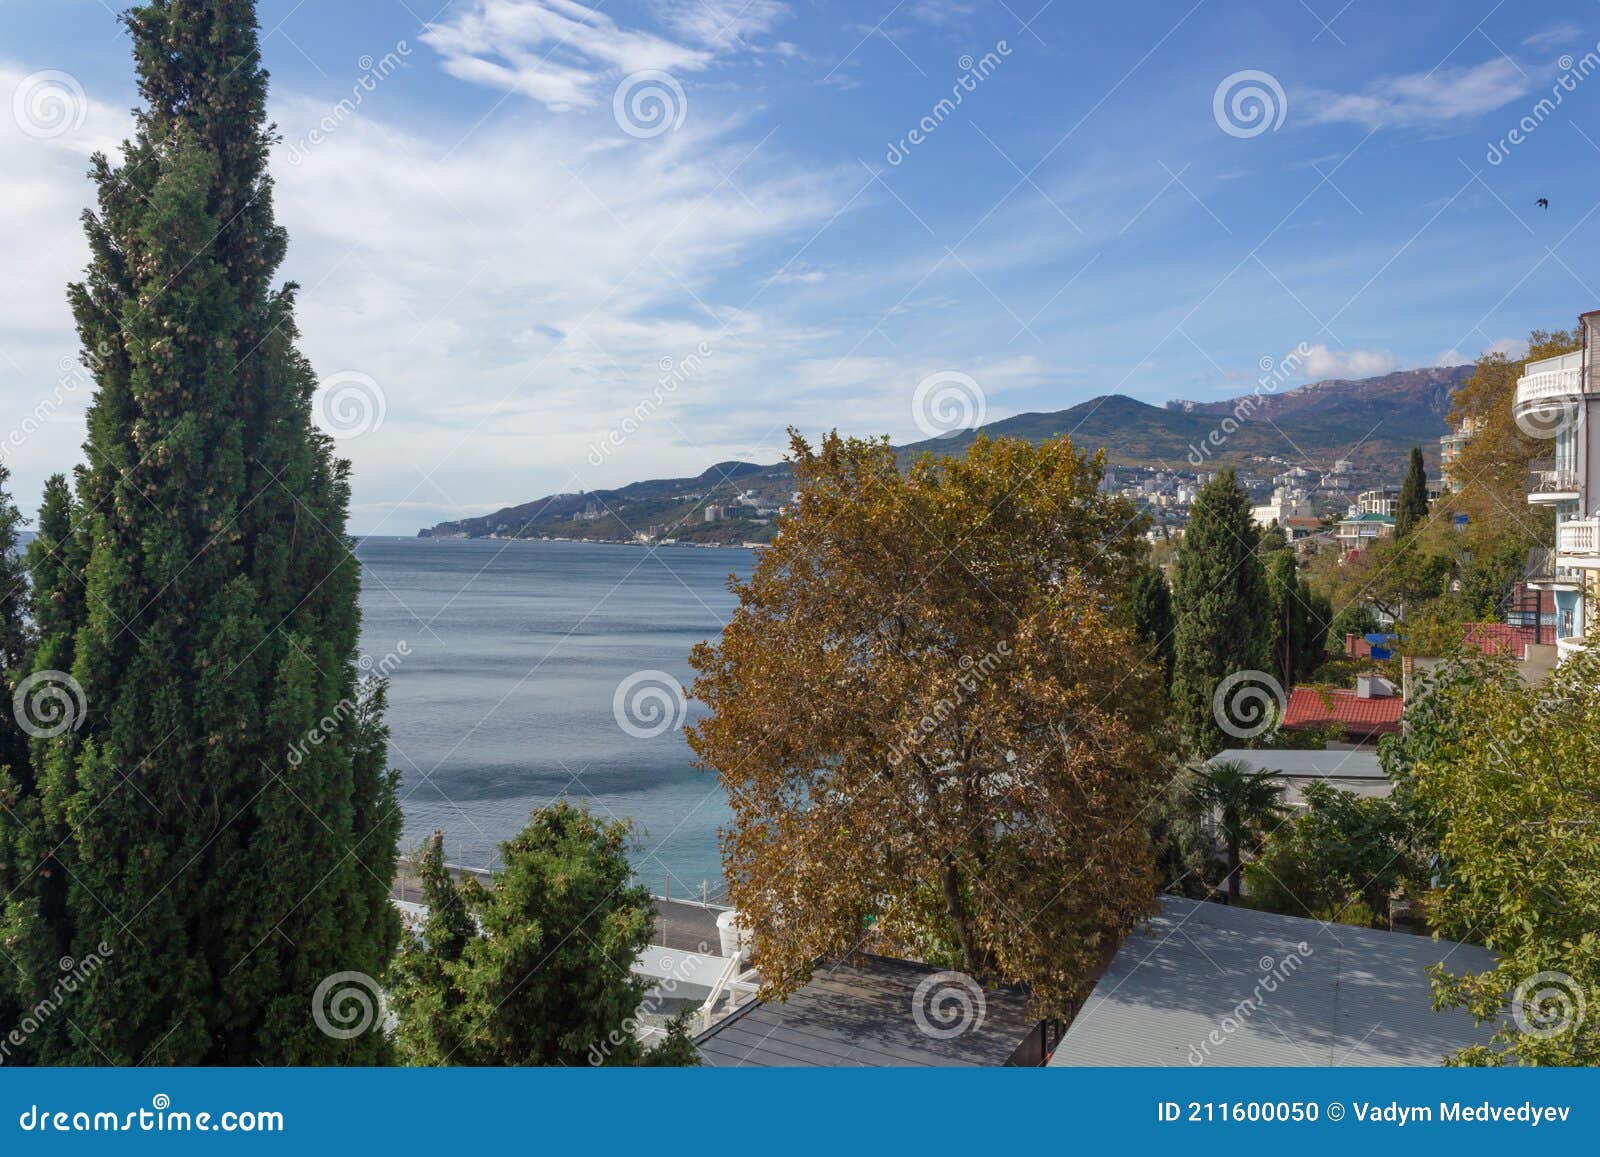 crimea coast with sea and mountain views, from apartments